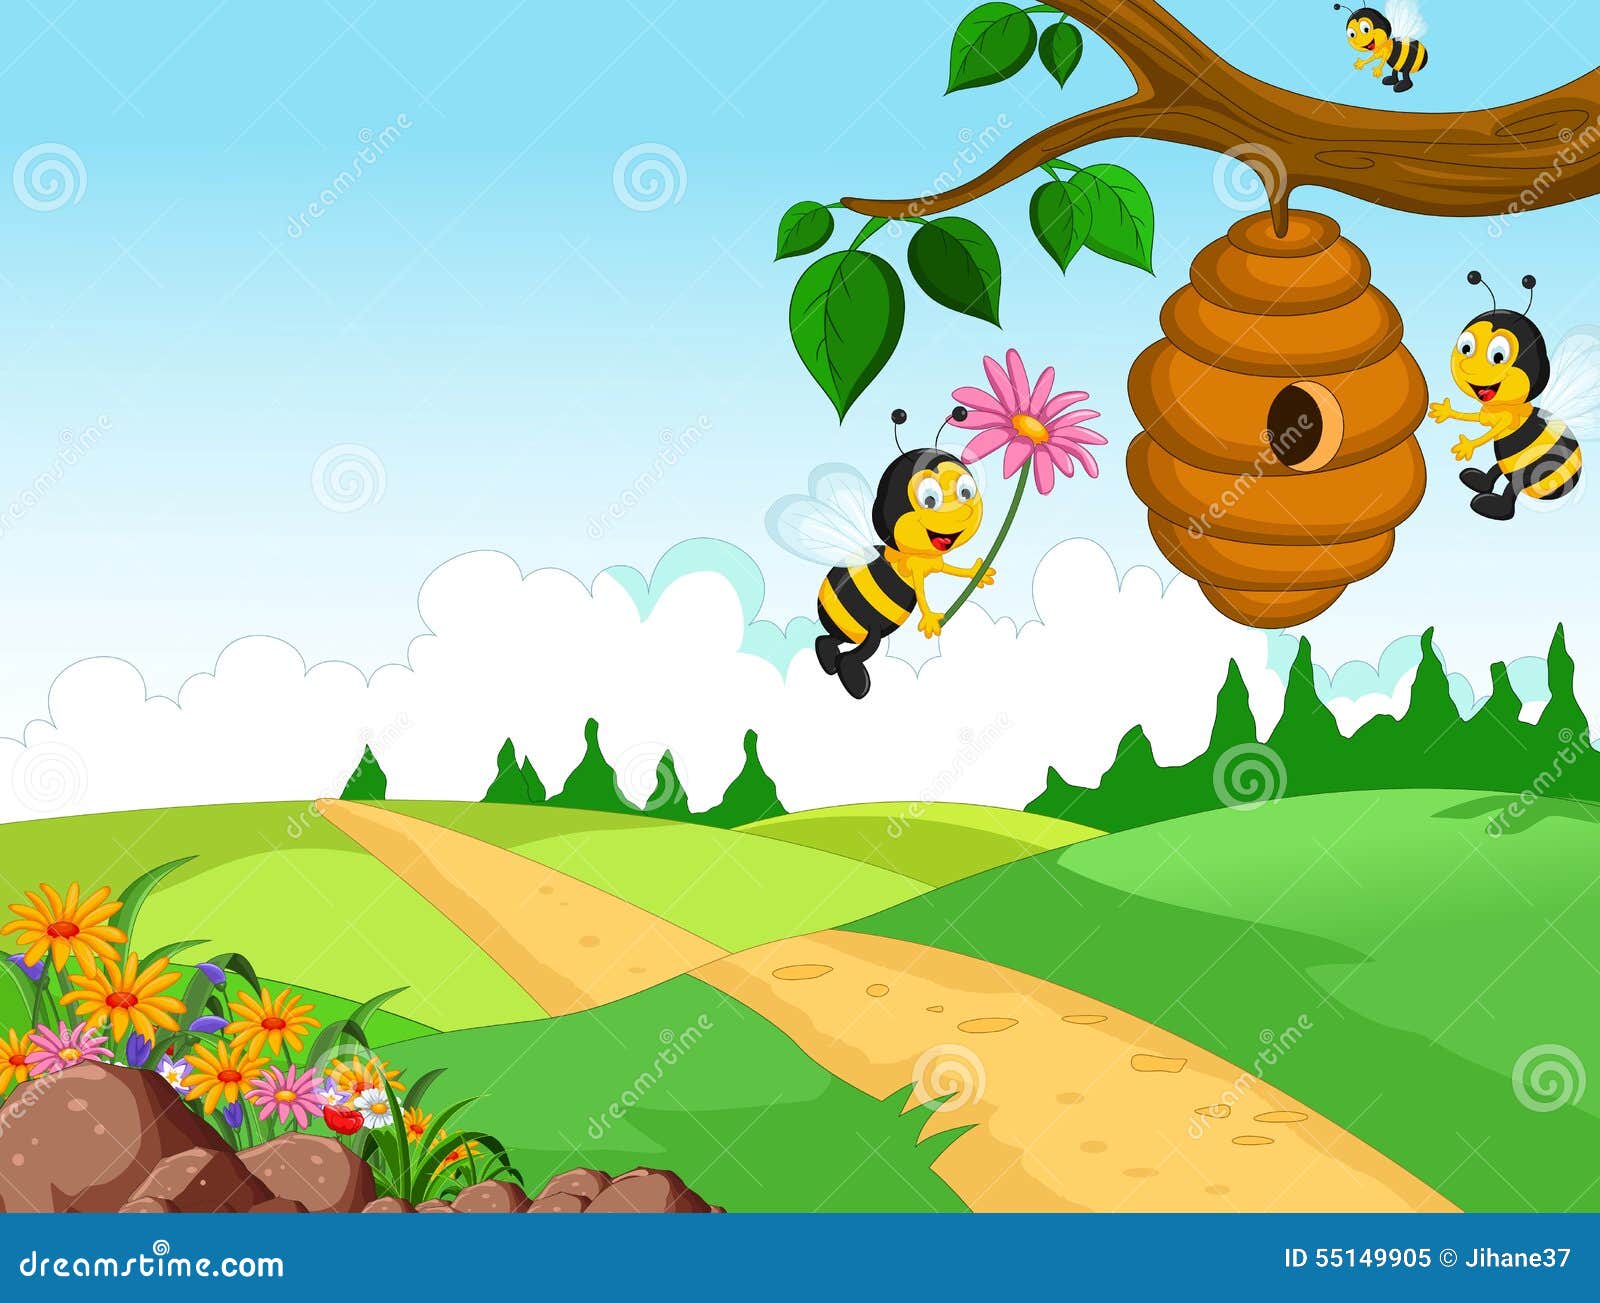 Bees Cartoon Holding Flower And A Beehive With Forest Background Stock